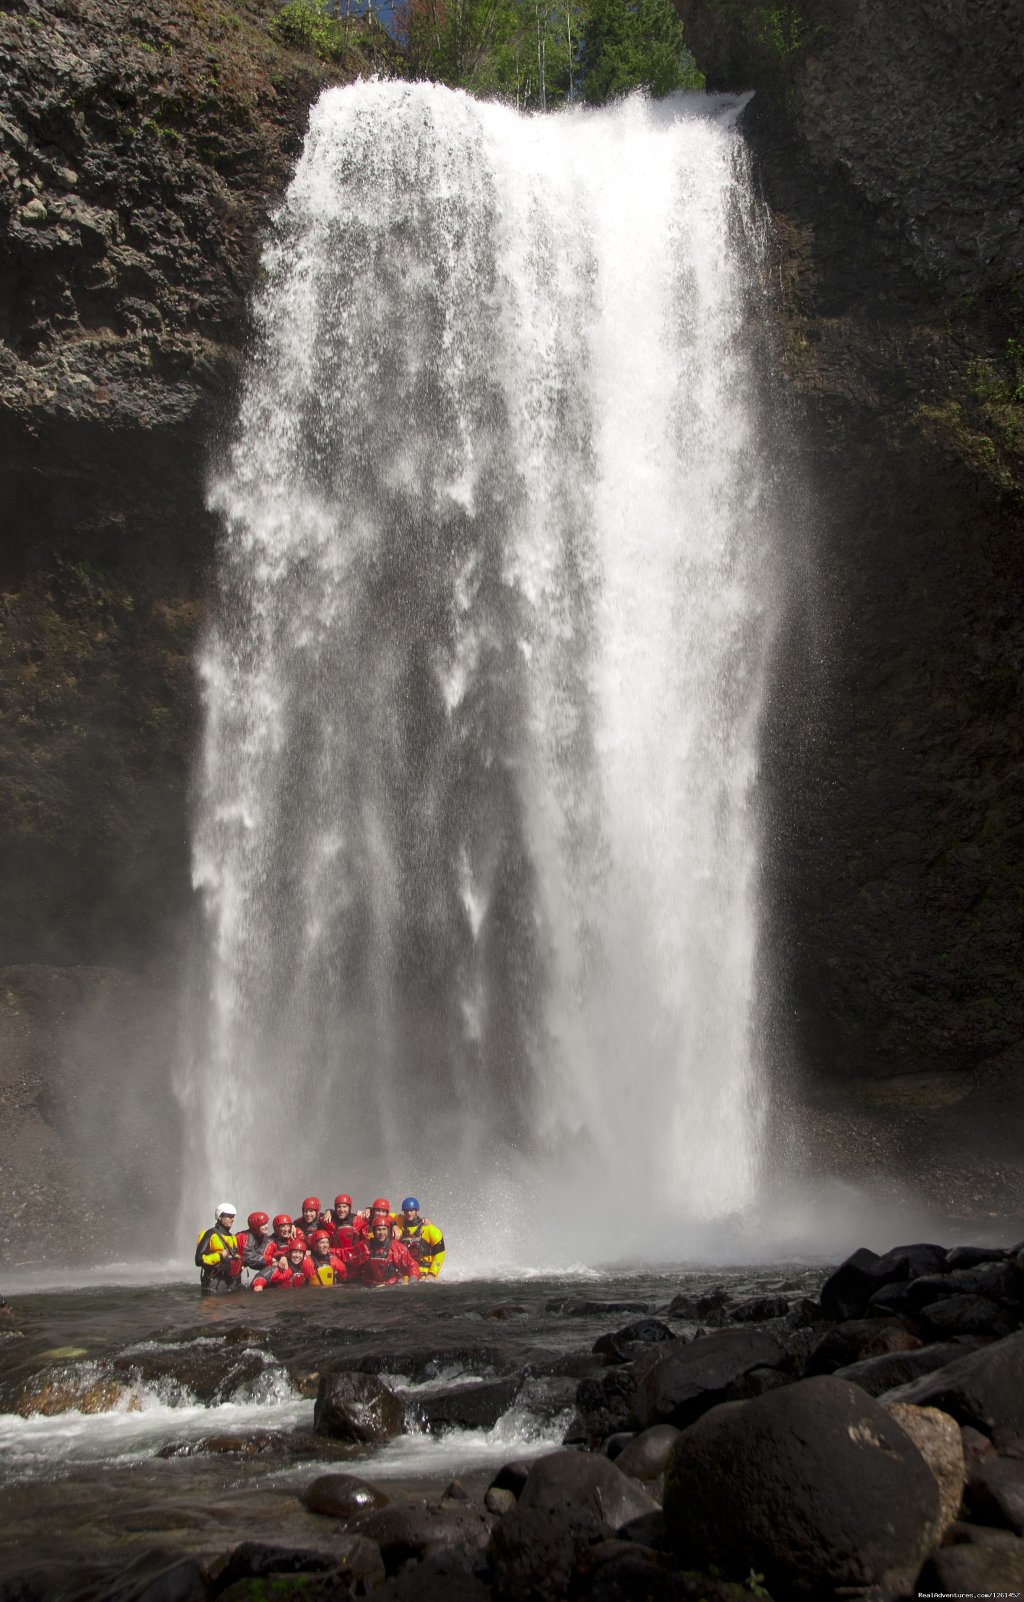 Wells Gray Park Waterfalls | Whitewater Rafting In Wells Gray Park, Bc | Image #4/6 | 